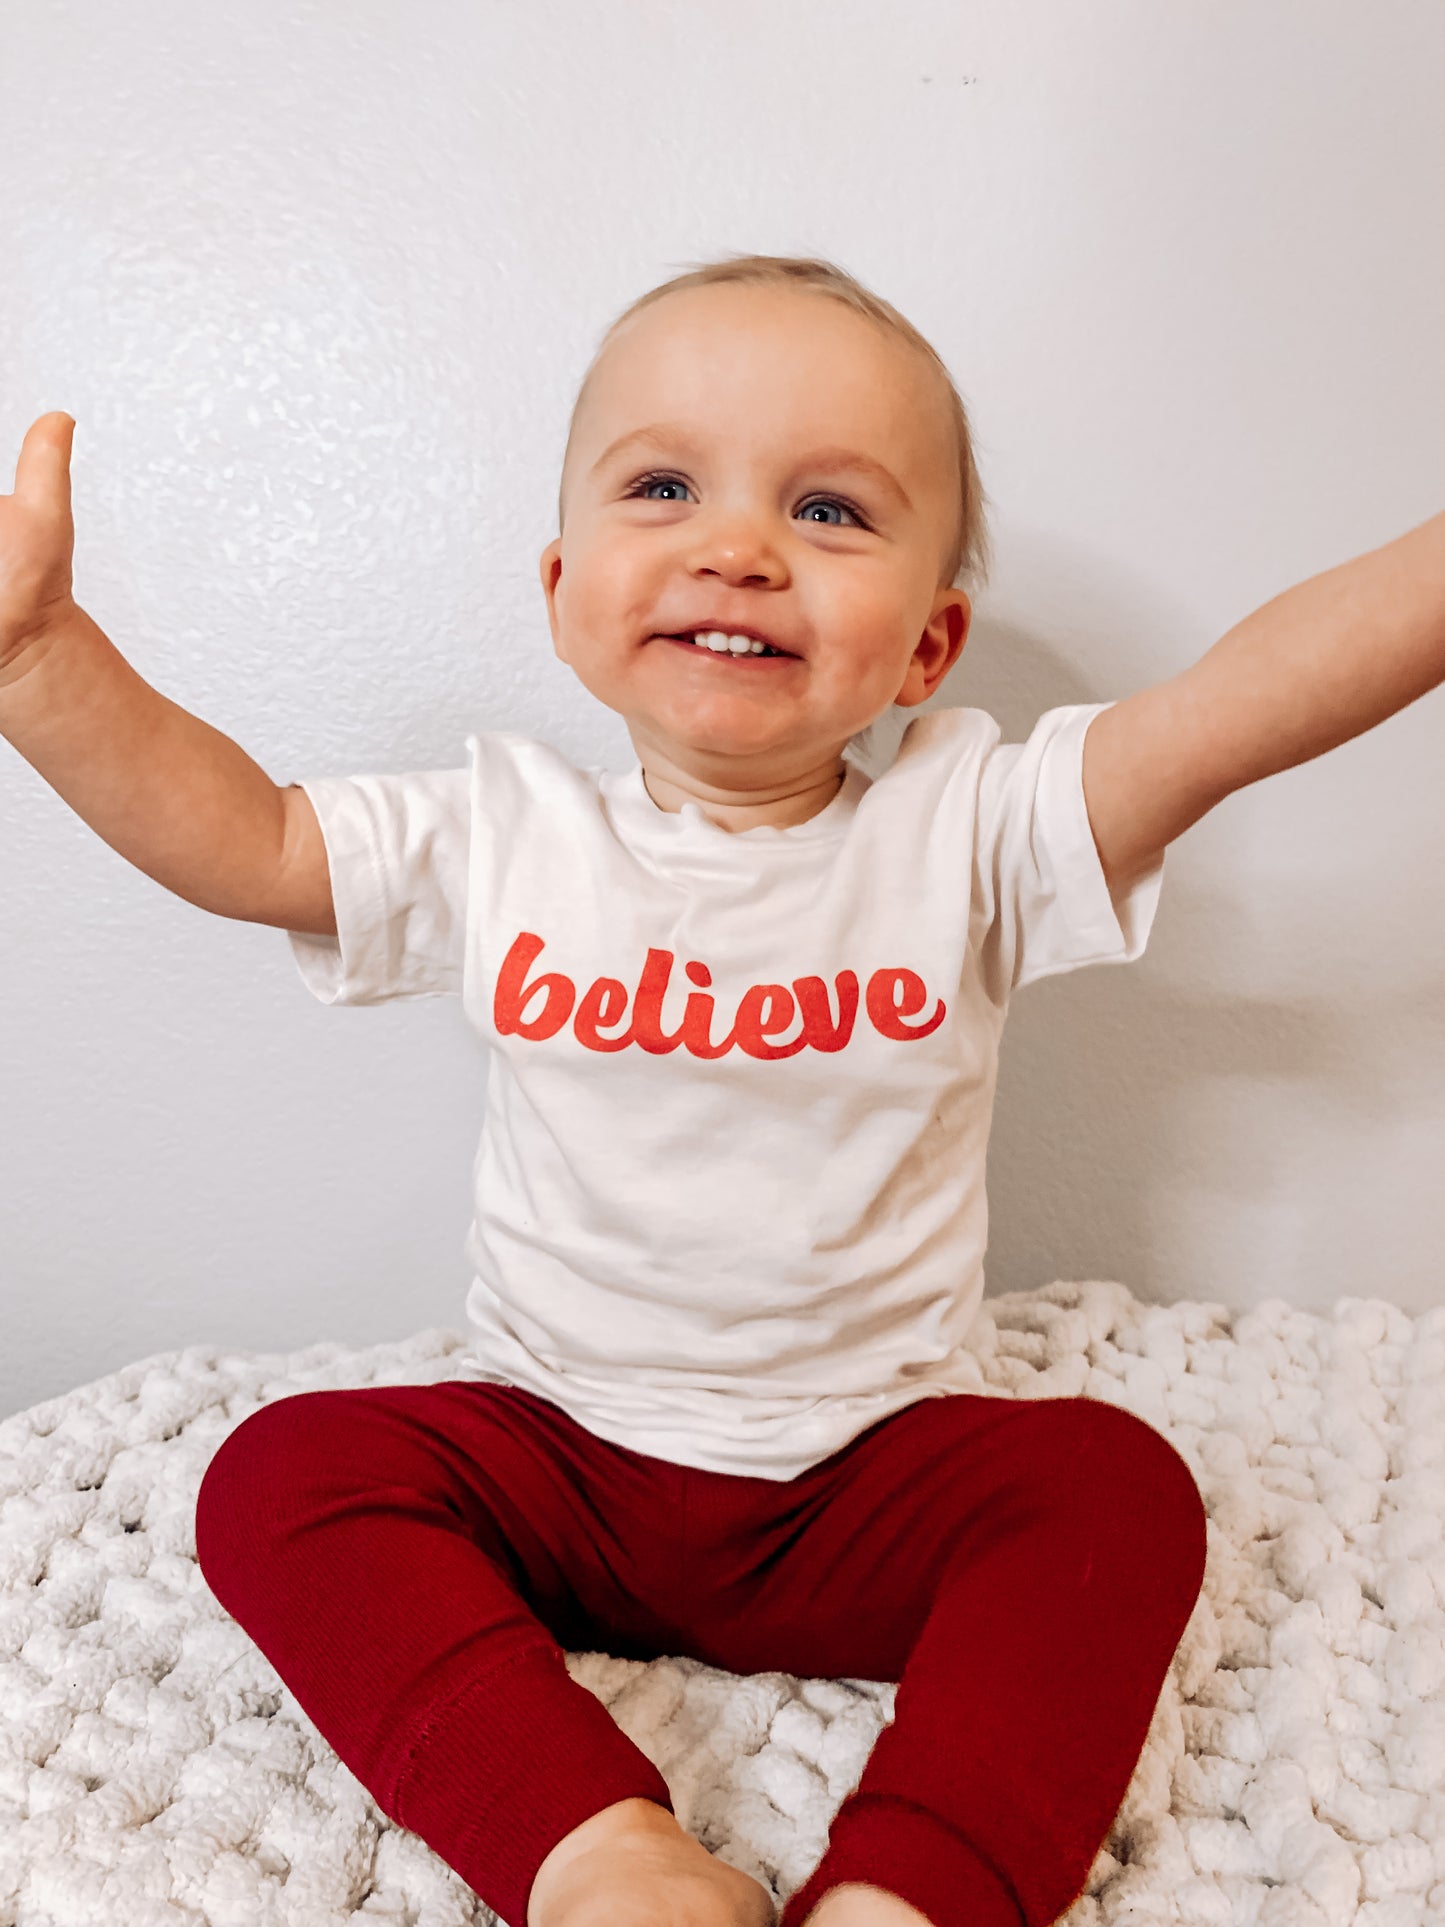 Believe (Thick Cursive, Red) - Kids Tee (White)